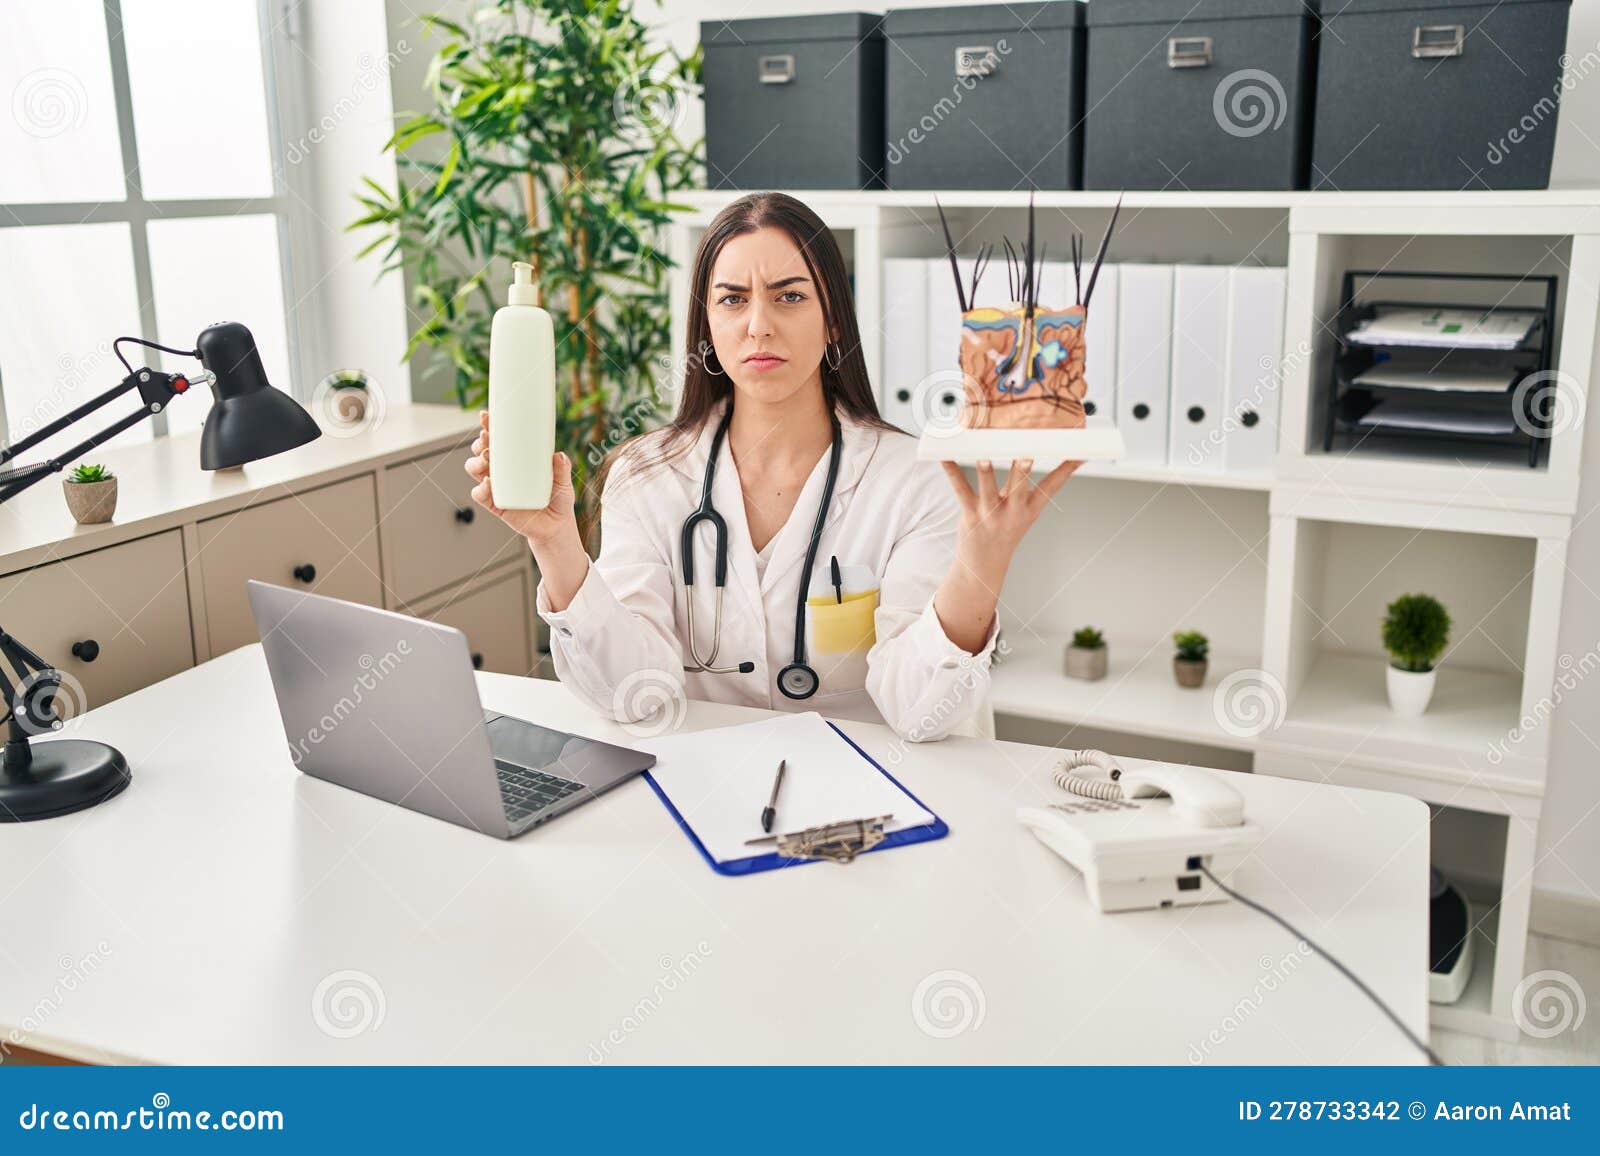 hispanic doctor woman holding model of human anatomical skin and hair skeptic and nervous, frowning upset because of problem